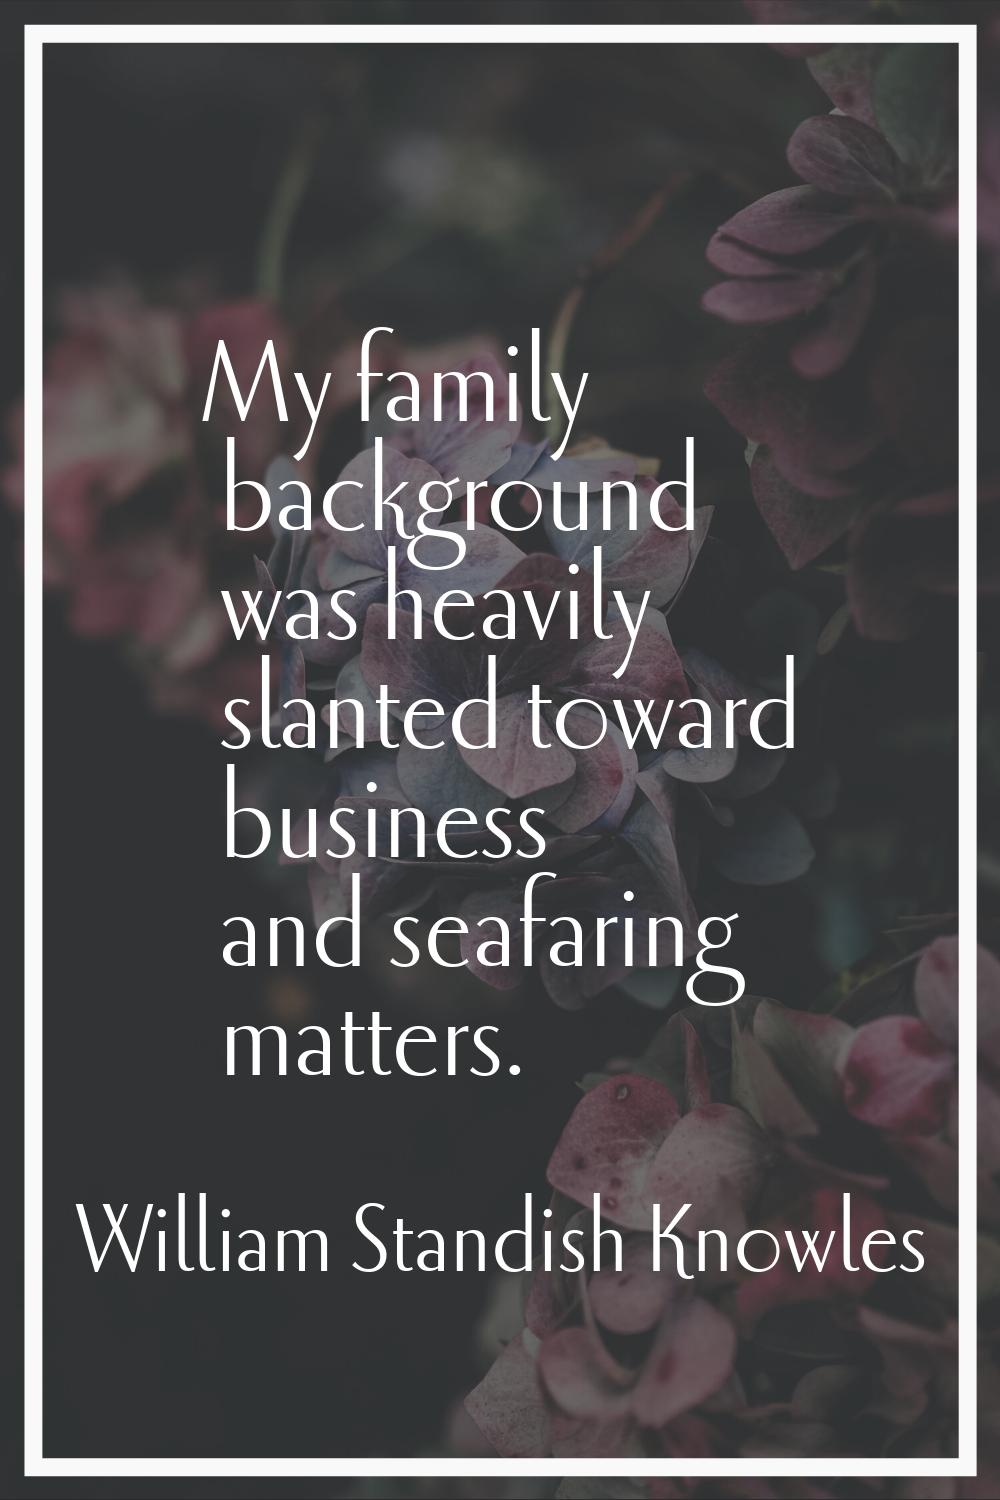 My family background was heavily slanted toward business and seafaring matters.